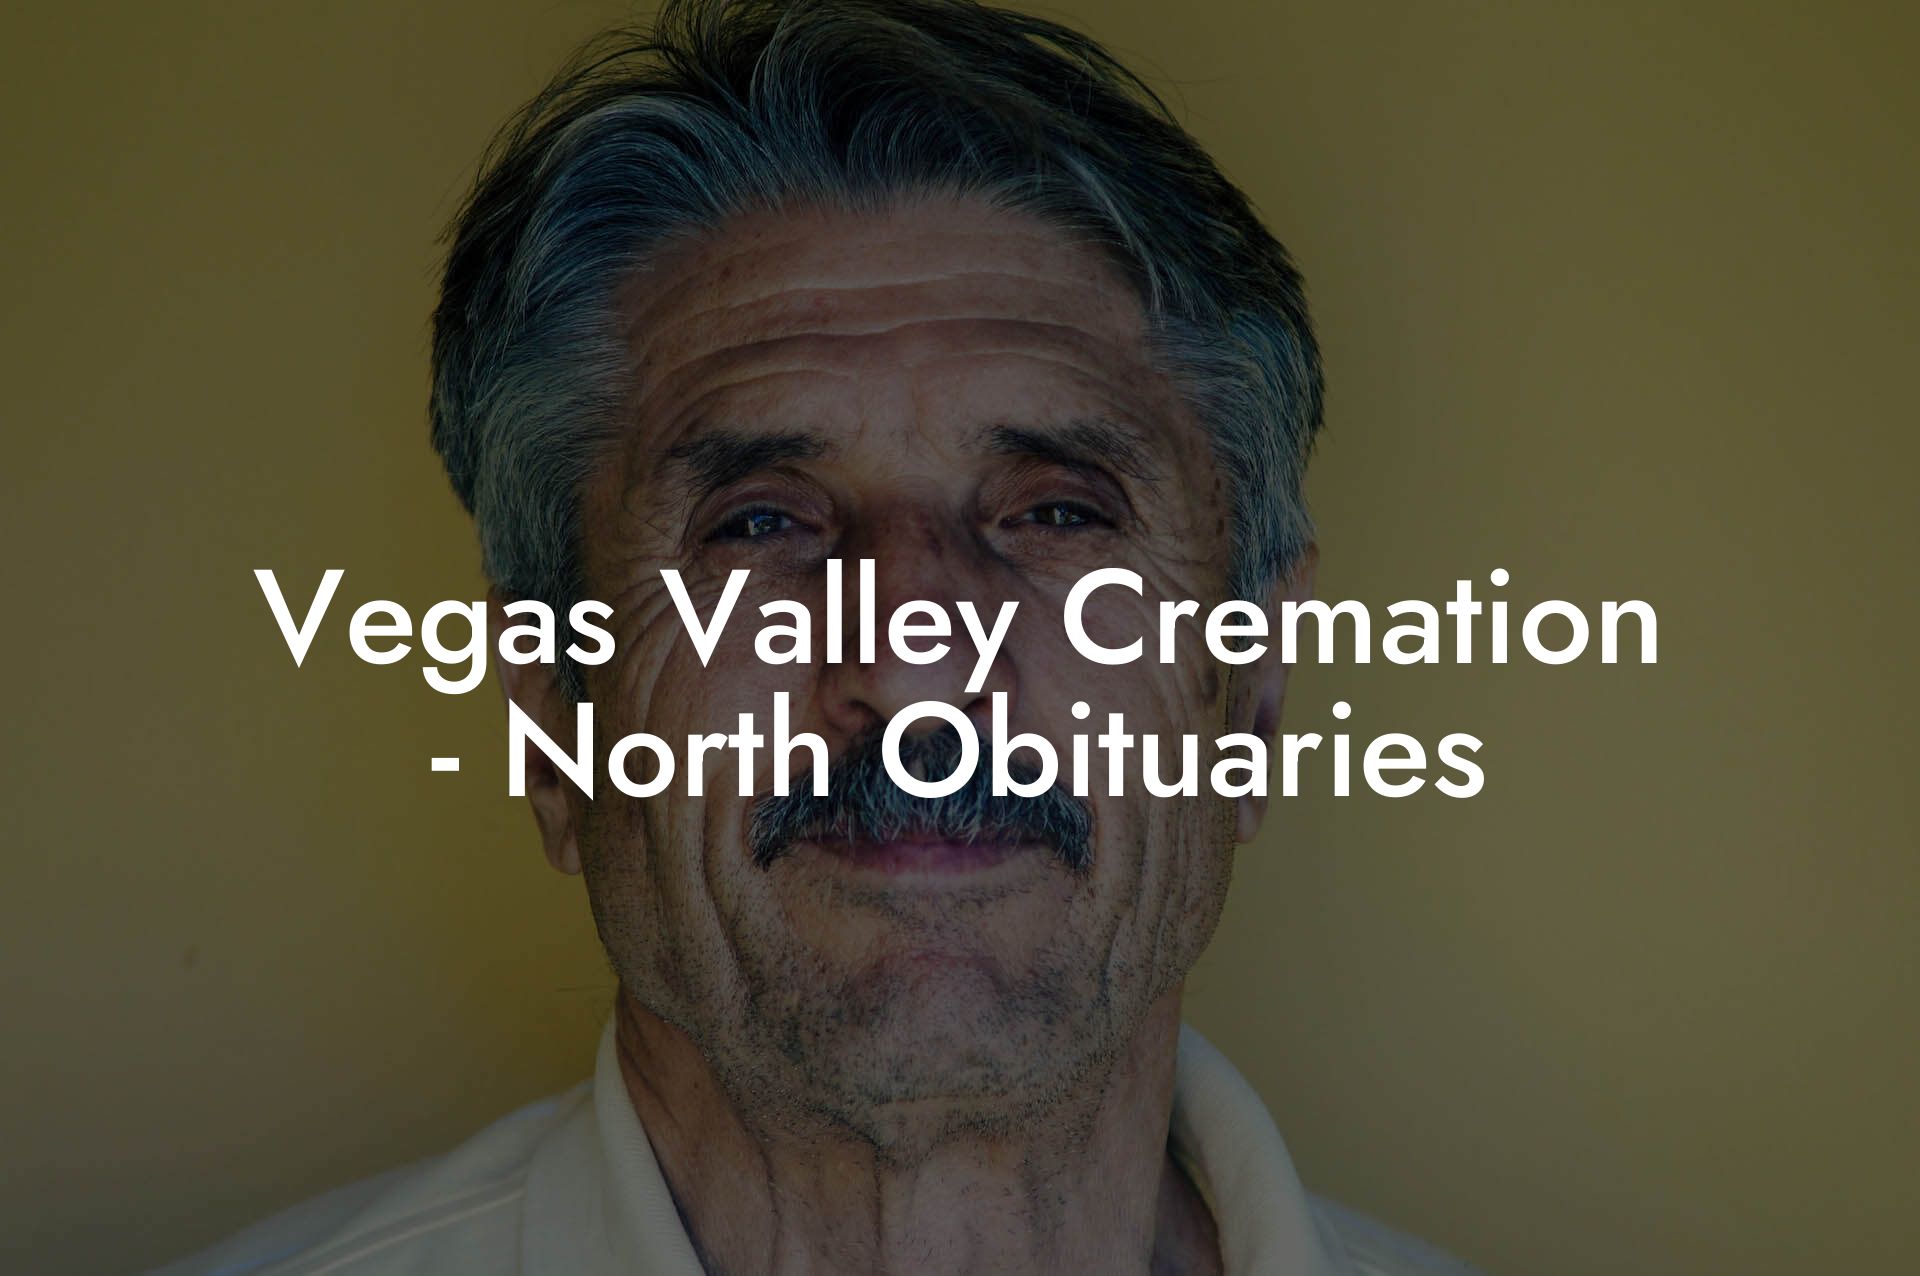 Vegas Valley Cremation - North Obituaries